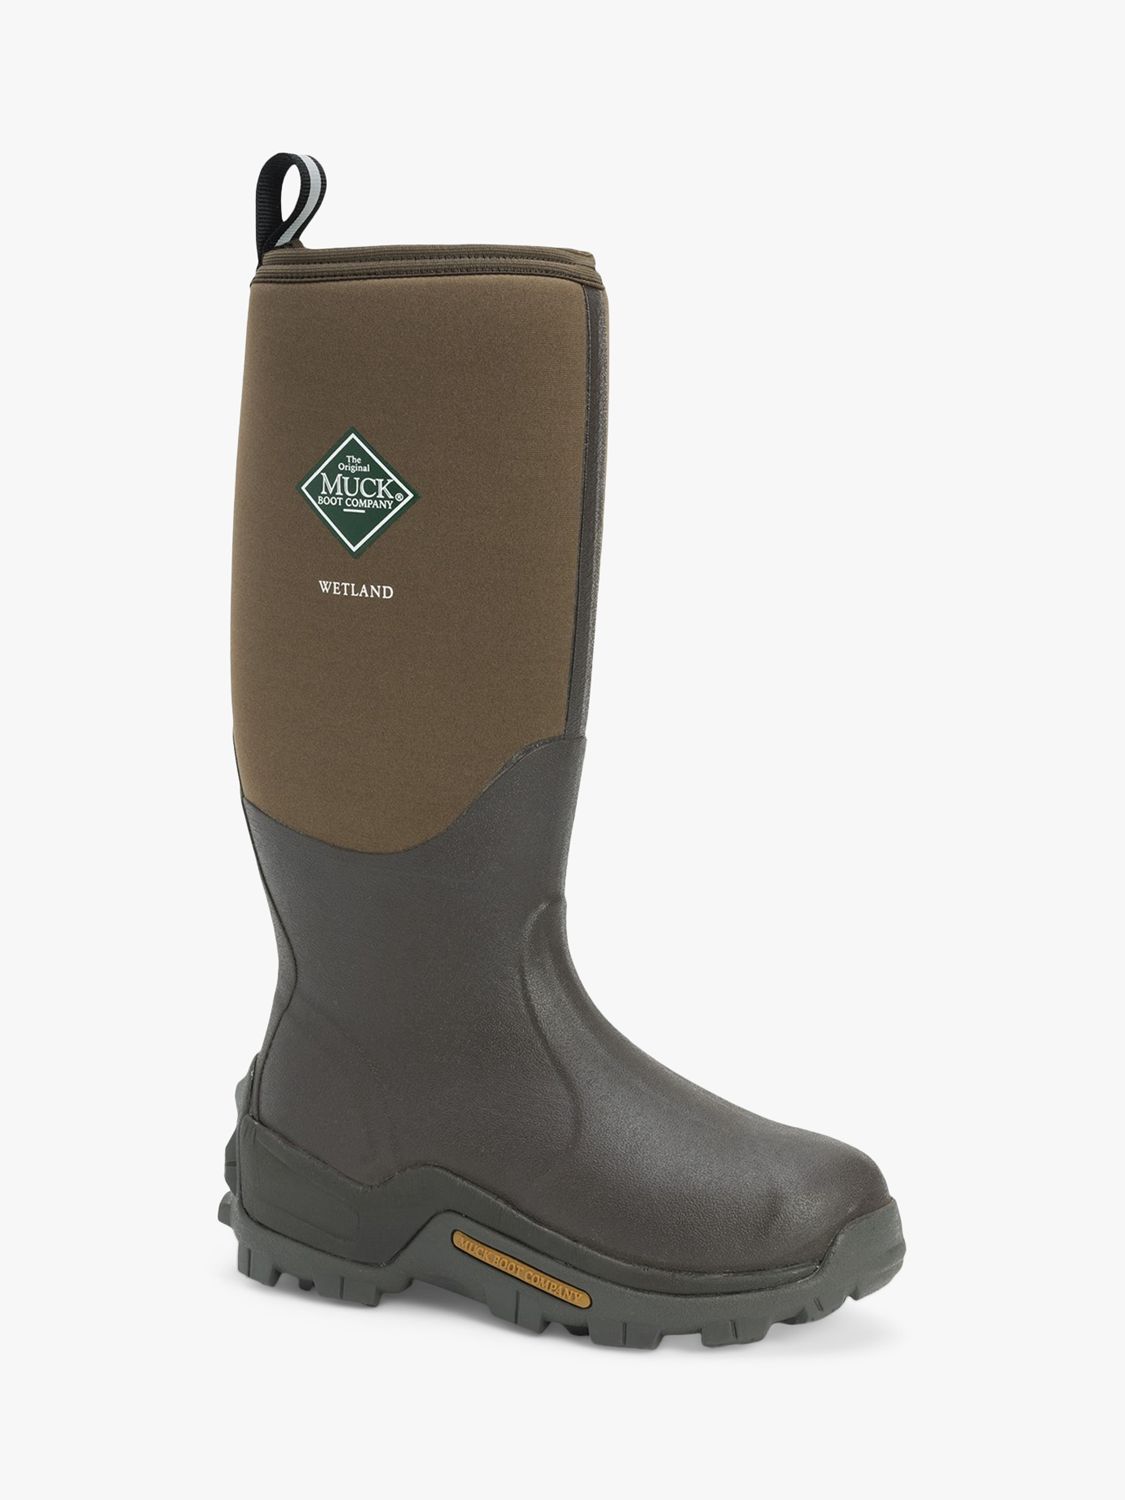 Muck Wetland Tall Wellington Boots, Brown at John Lewis & Partners